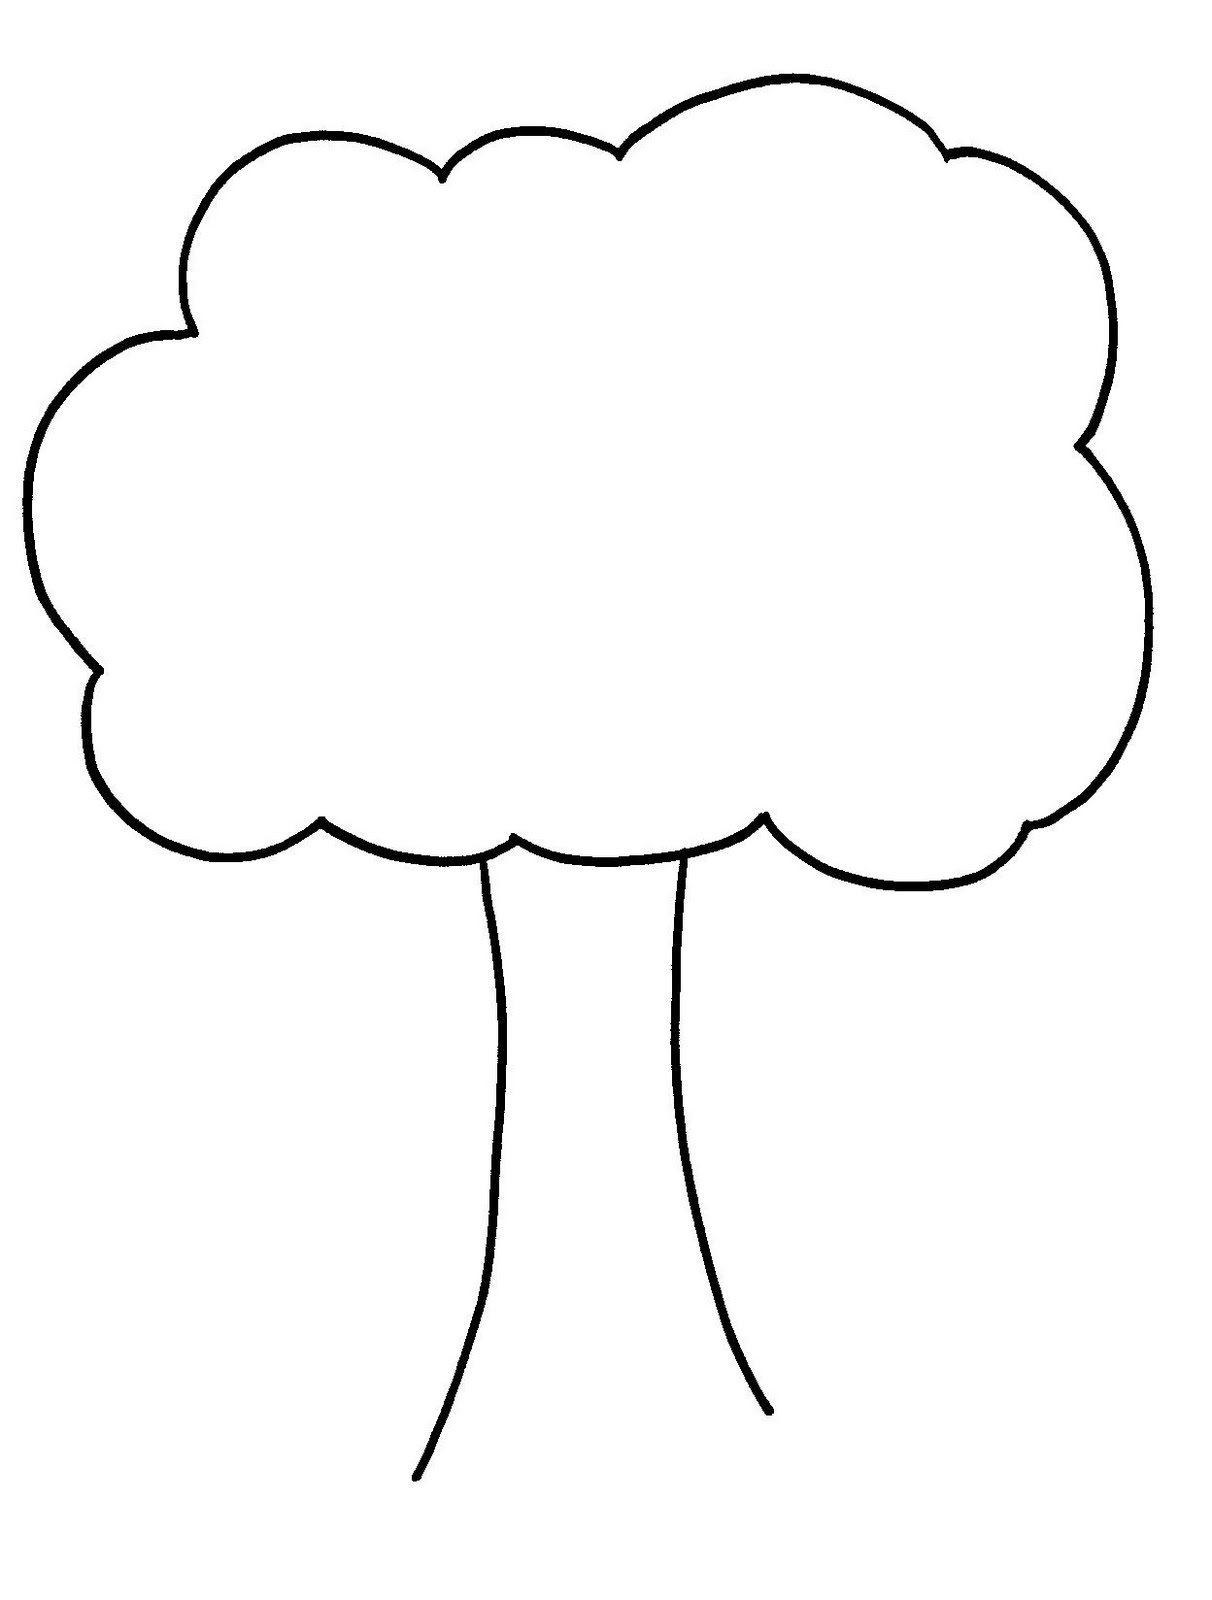 Clip Art Tree Outline - Free Clipart Images